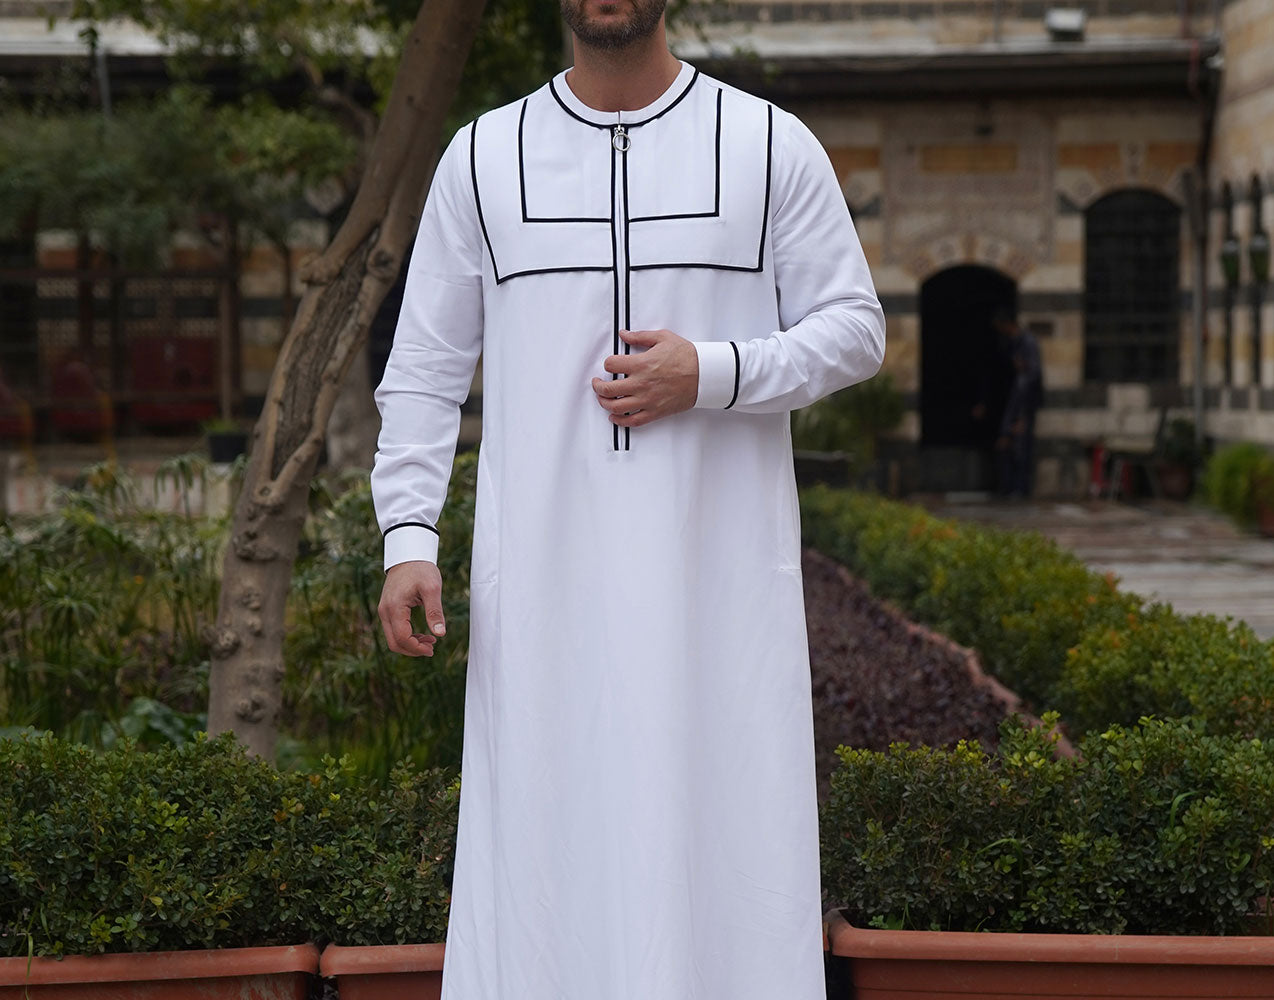 Islamic Clothing for Muslim Women and Men by SHUKR